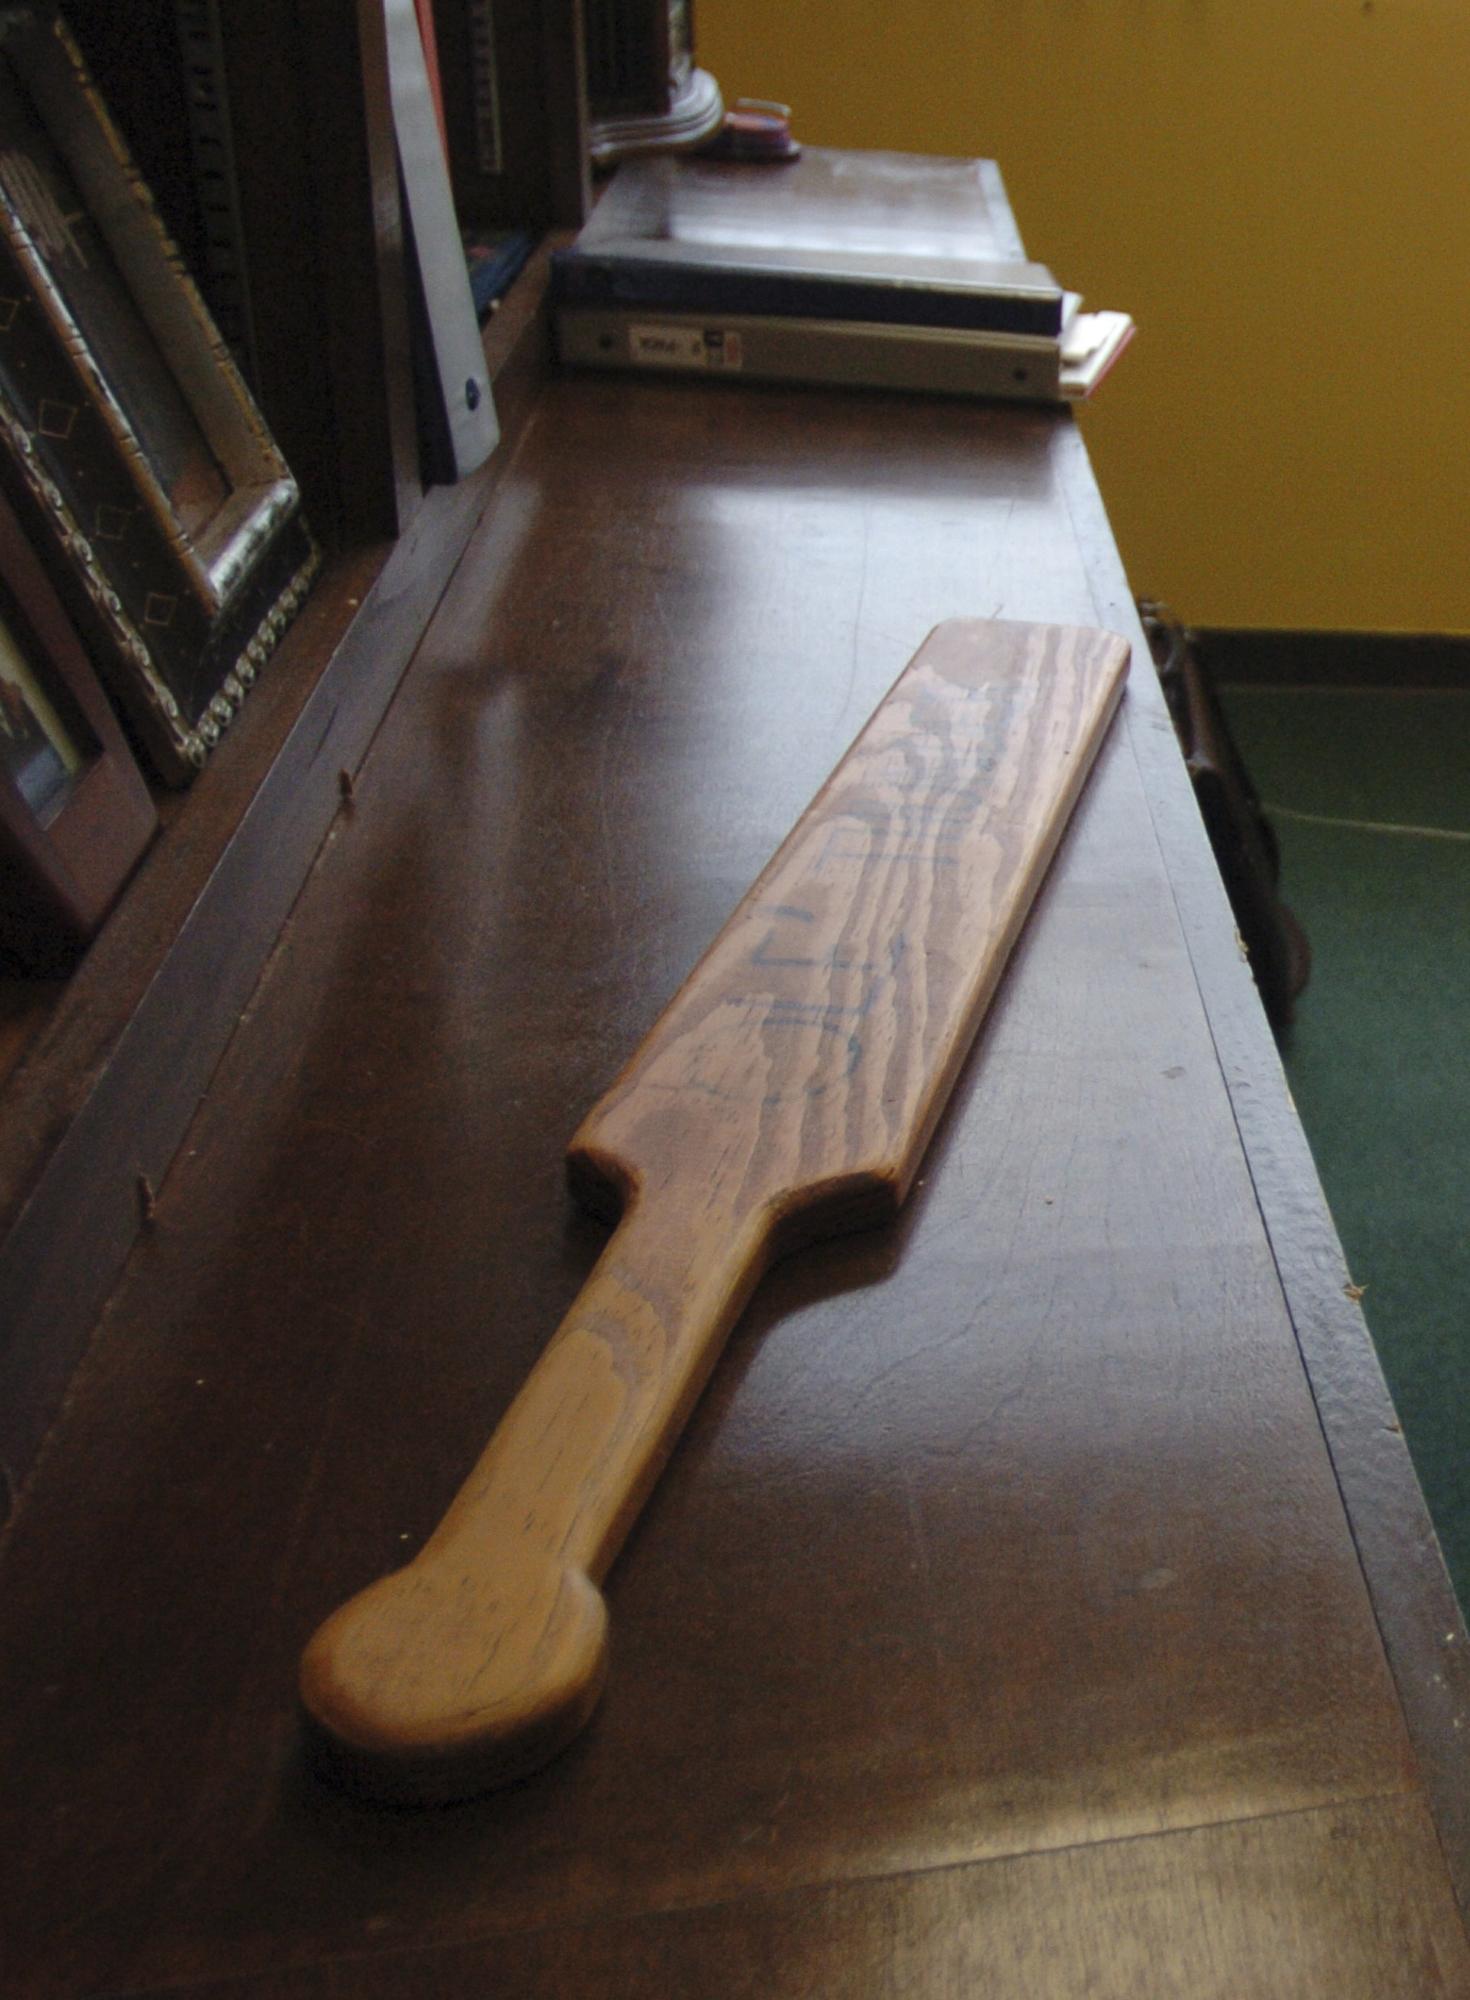 With Wooden Paddle Spanking Videos - No paddle. Stop in-school spankings. It's wrong. [Editorial]